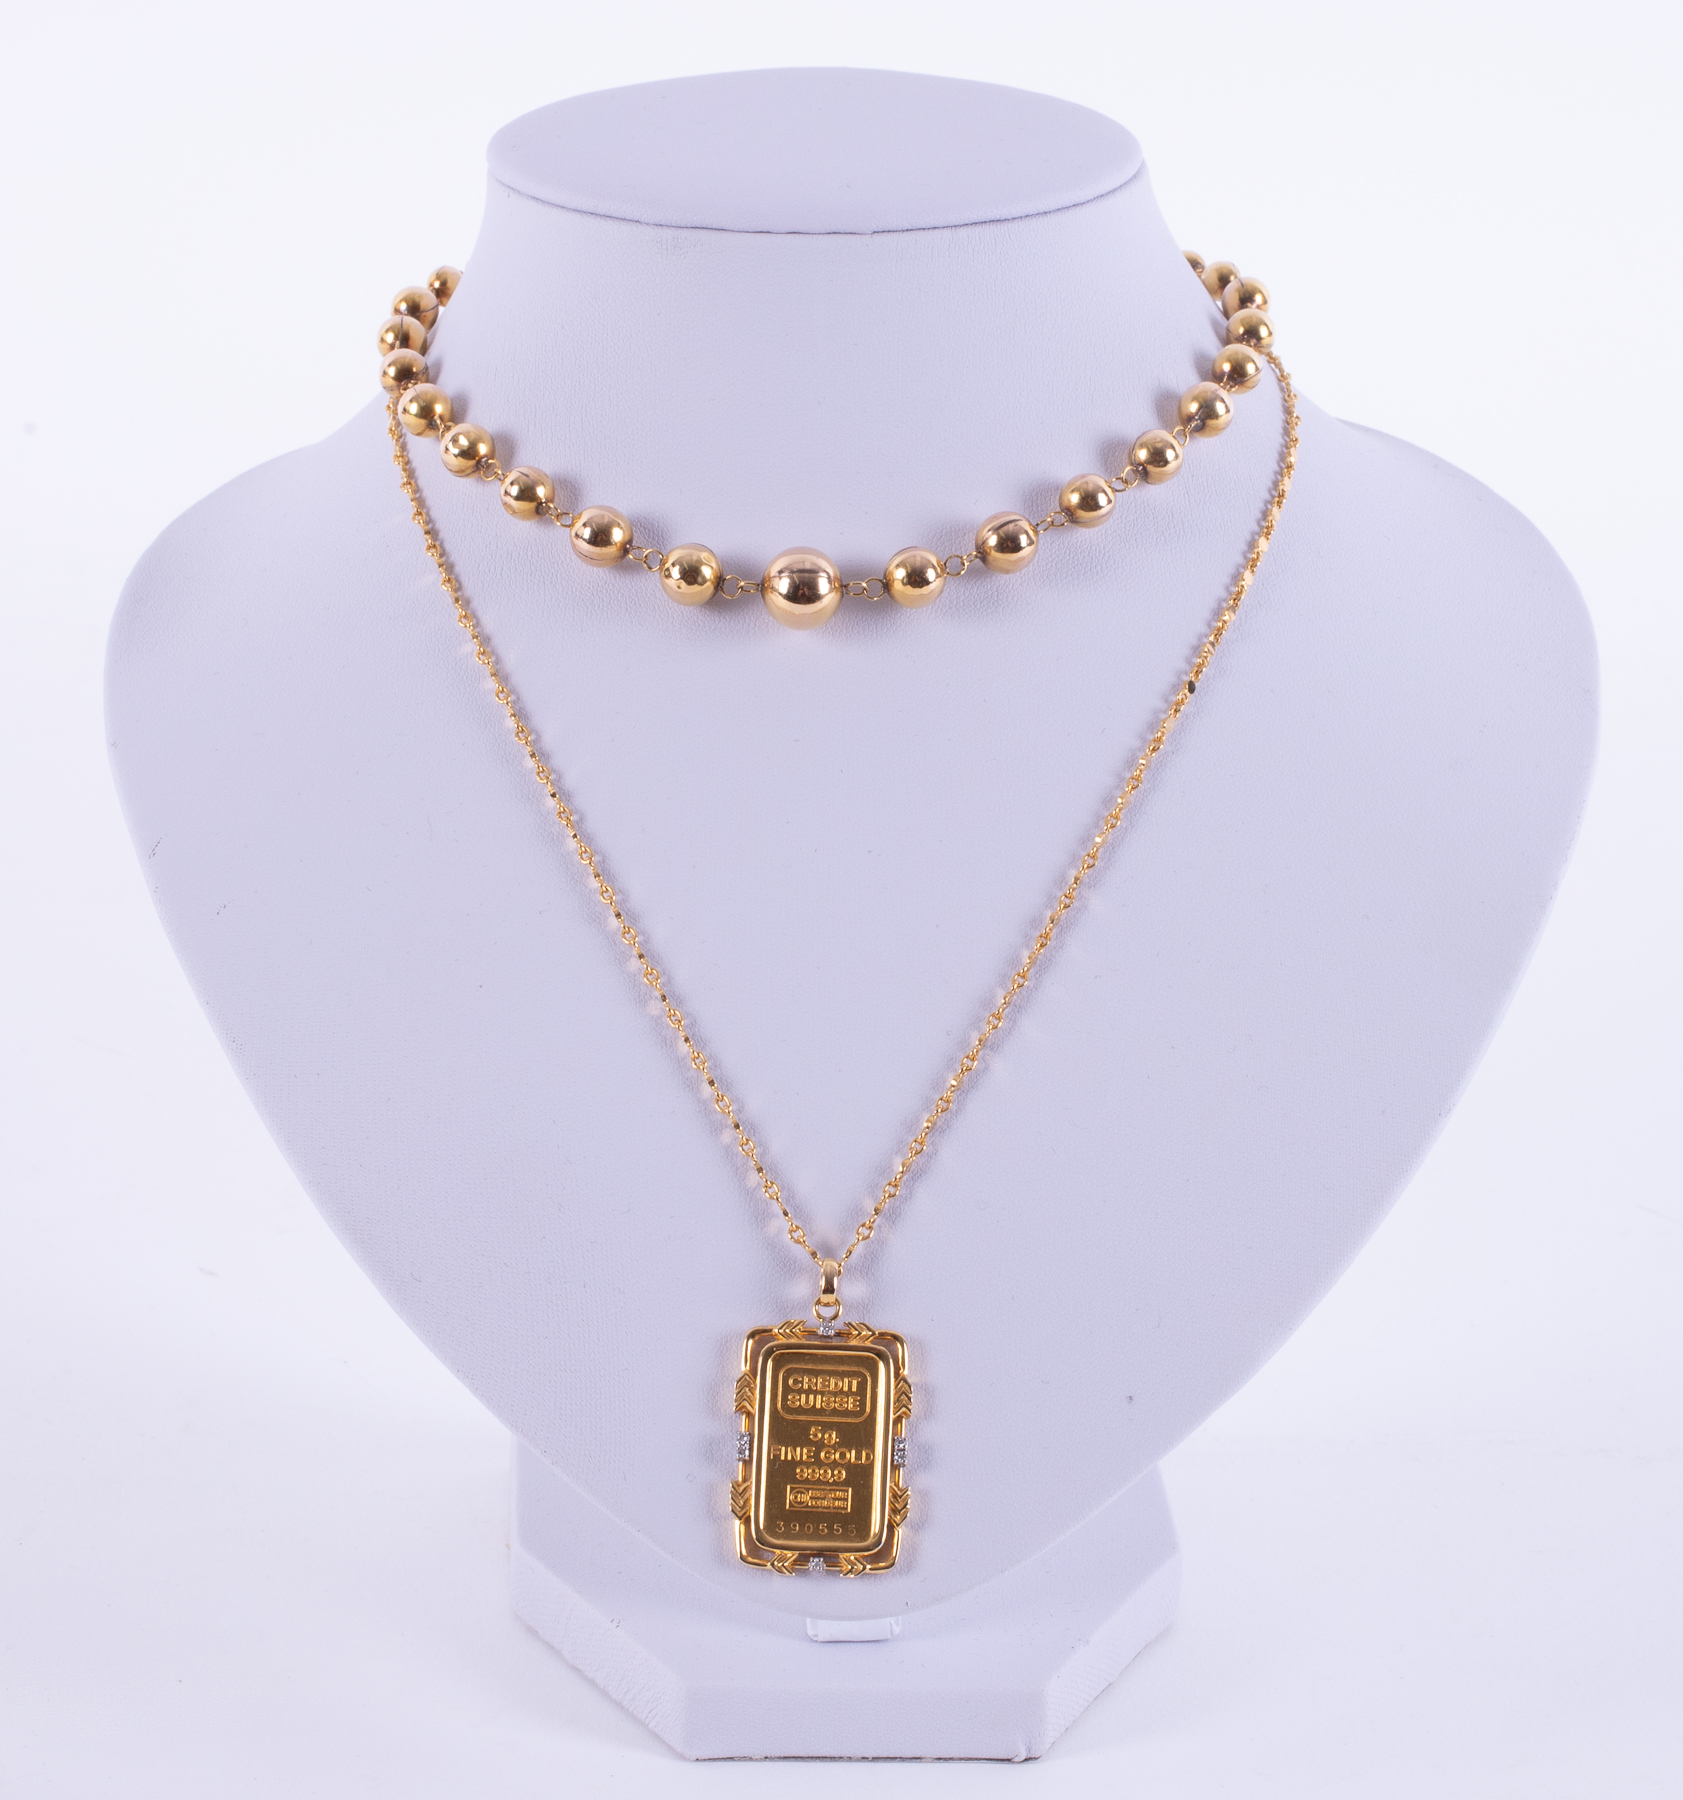 A 24ct yellow gold 19" fancy link chain stamped '916', 6.78gm with a 5g Fine Gold 999.9 Credit